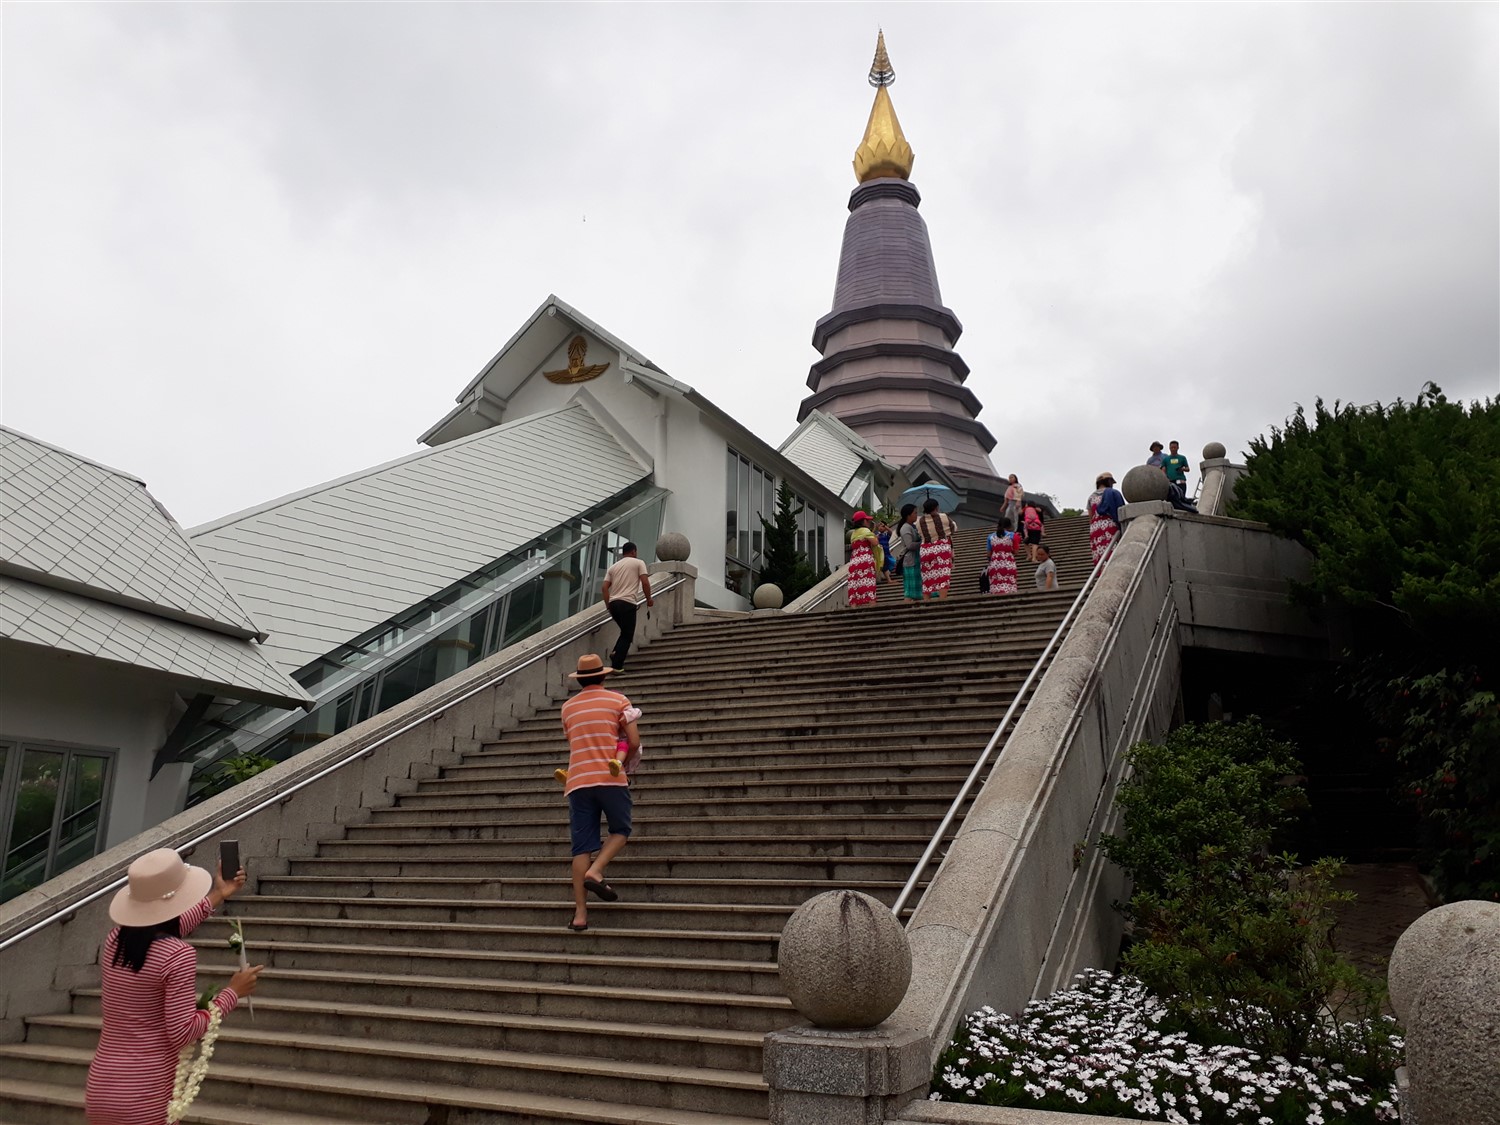 Day 2 - One Day Trip To Doi Inthanon National Park : Chiang Mai, Thailand (Apr'17) 18